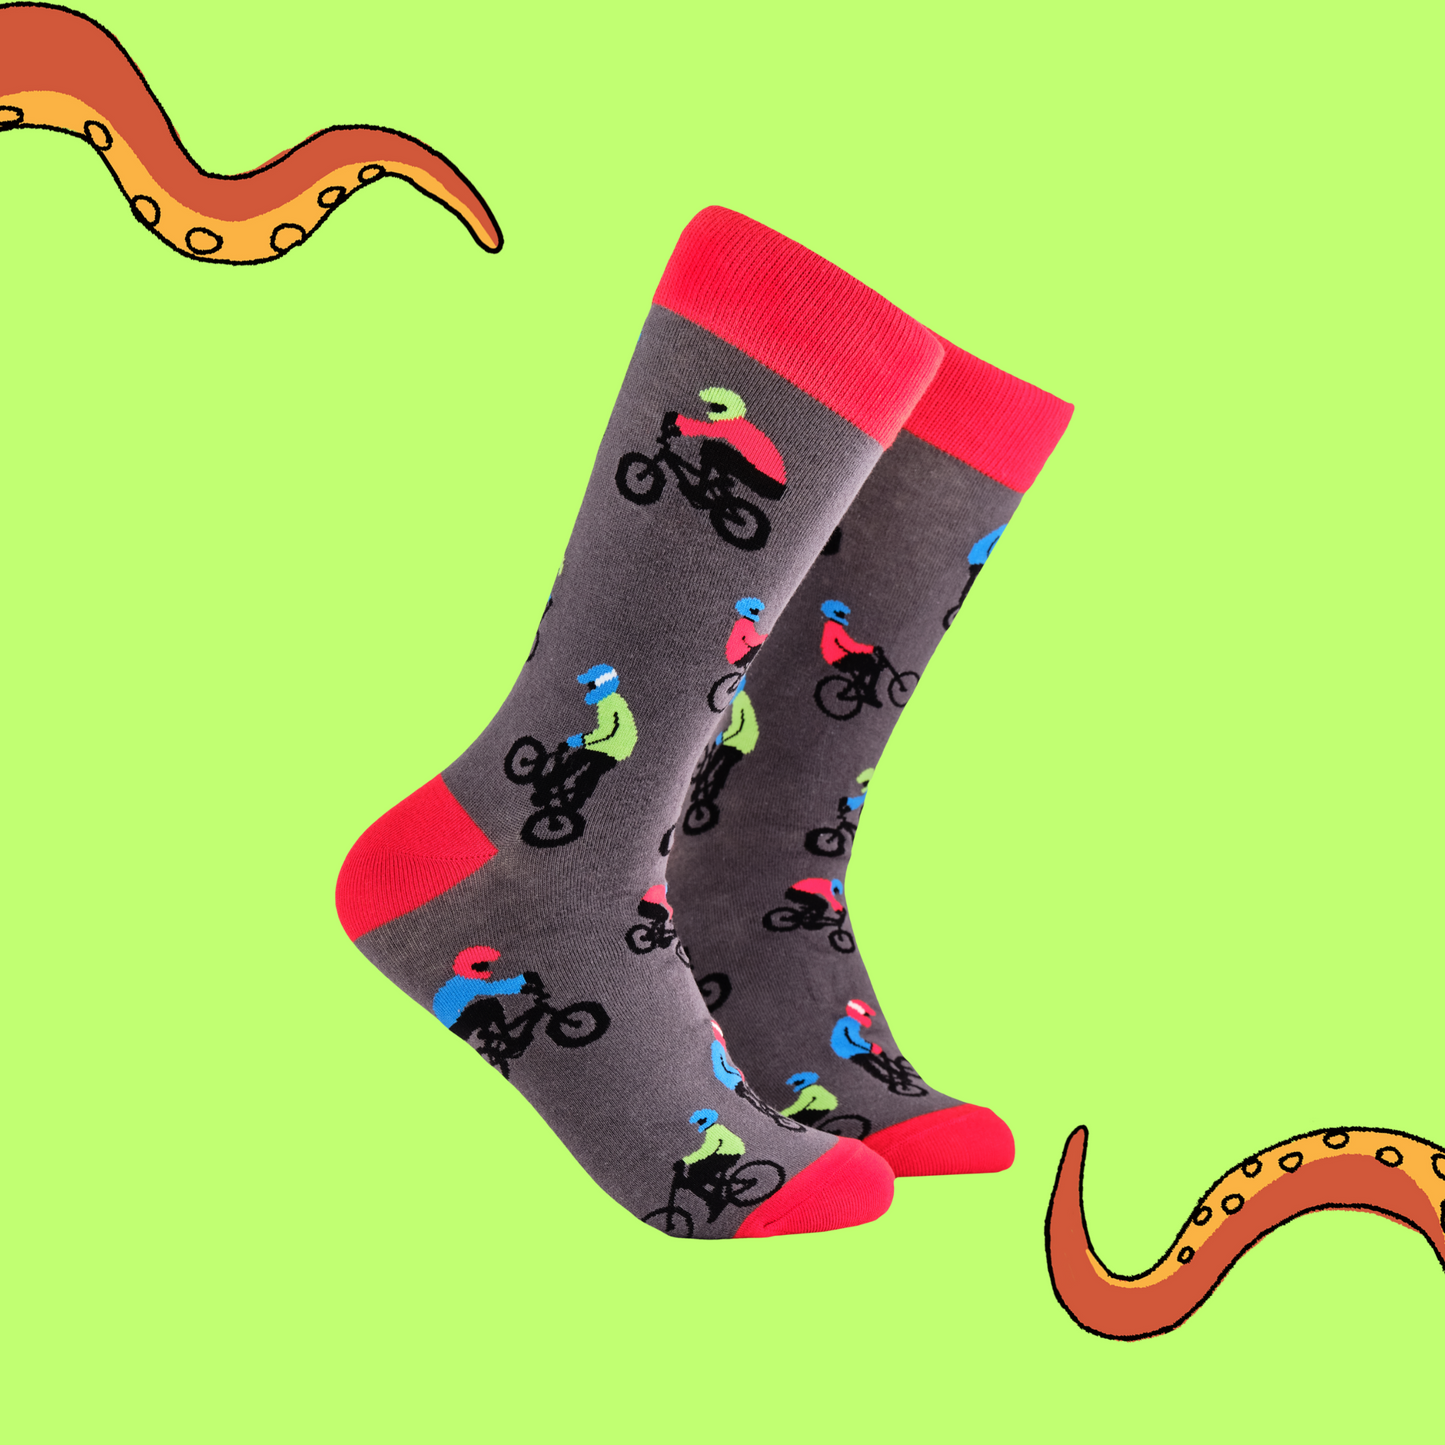 A pair of socks depicting people riding BMX bikes. Grey legs, red cuff, heel and toe.